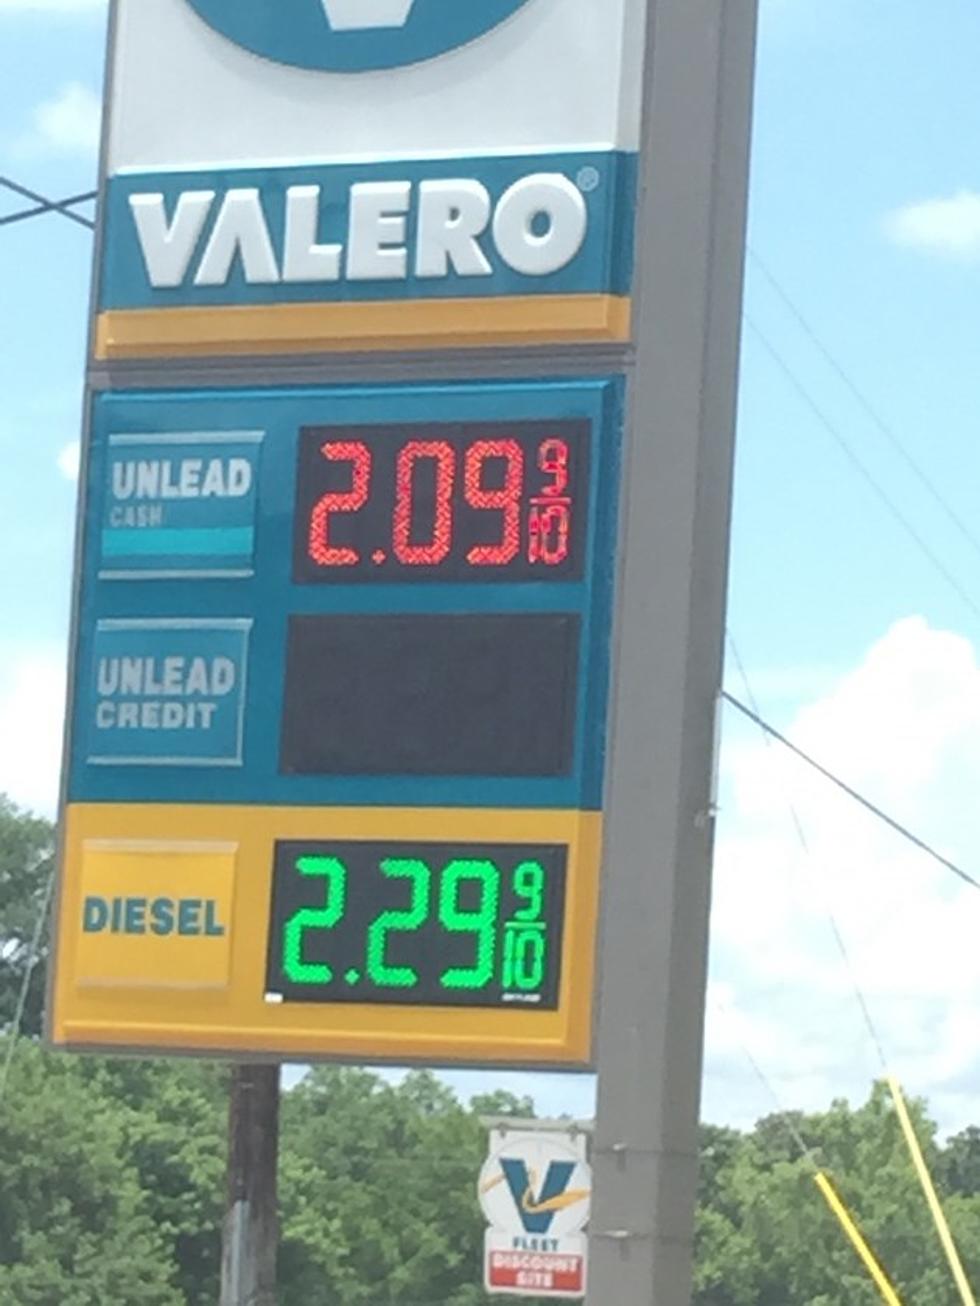 Gas Price Signs Aren’t What They Seem To Be Sometimes, Be Aware!